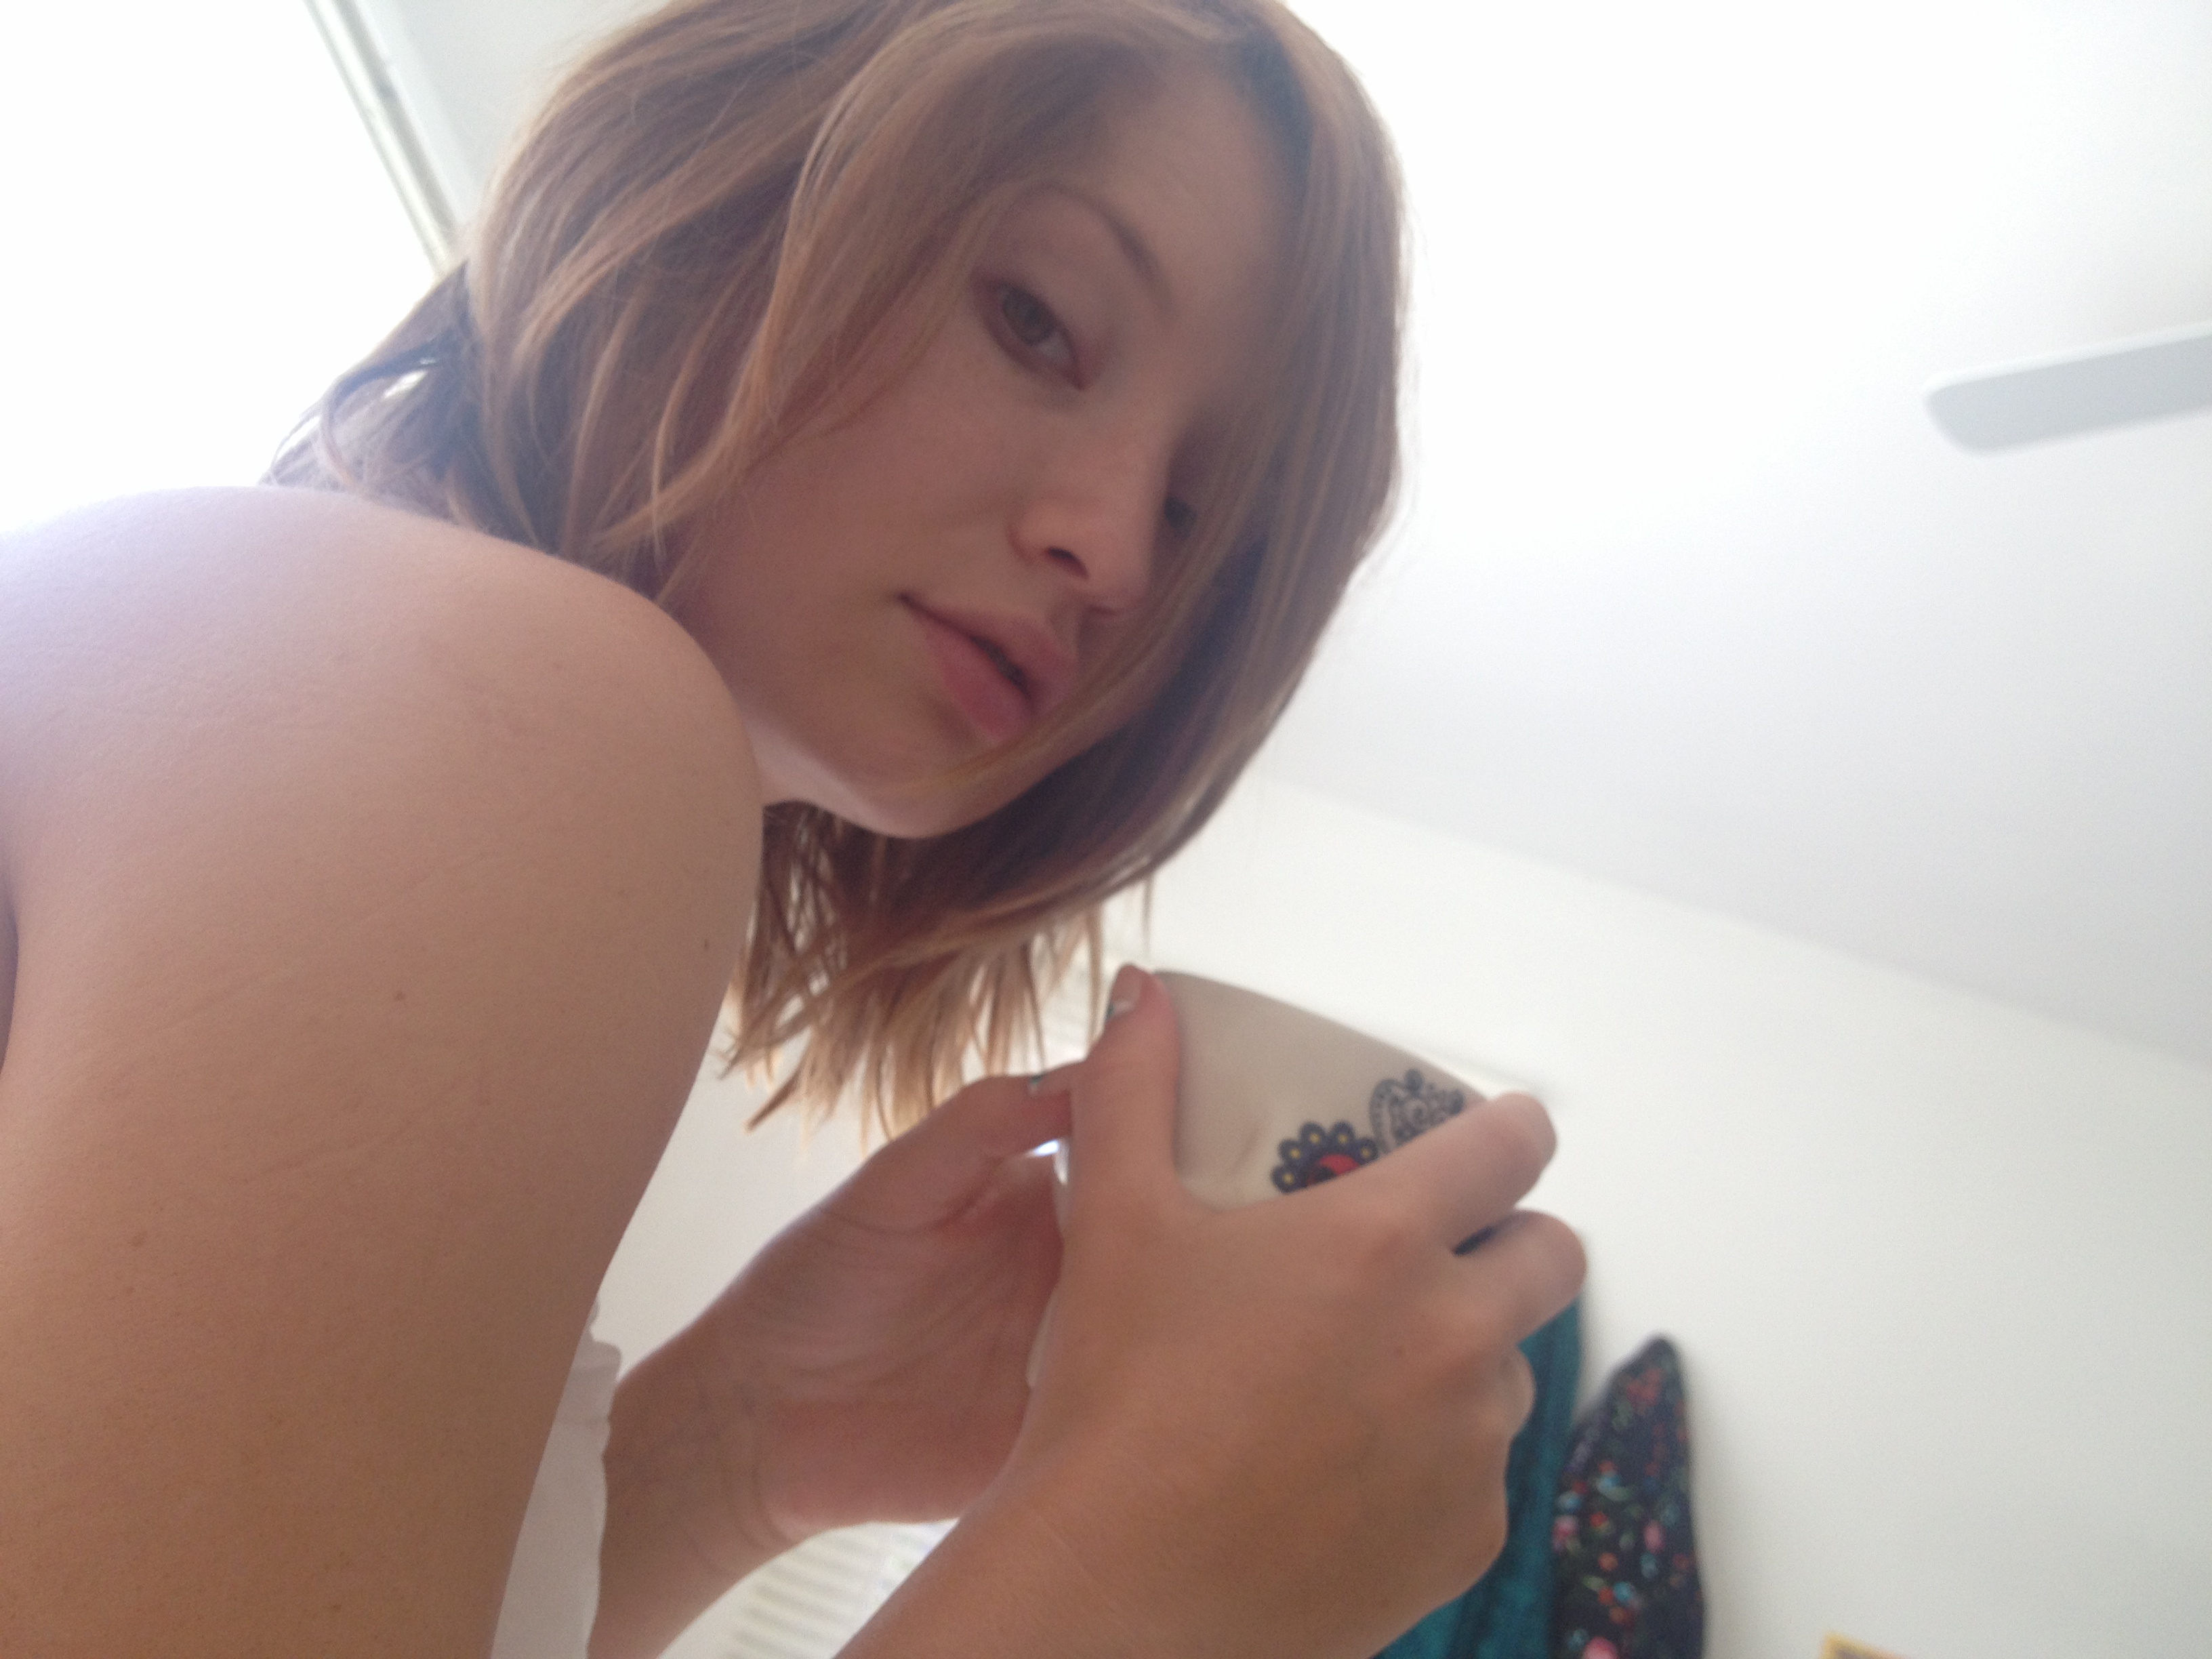 Emily Browning on leaked nudes #79529795